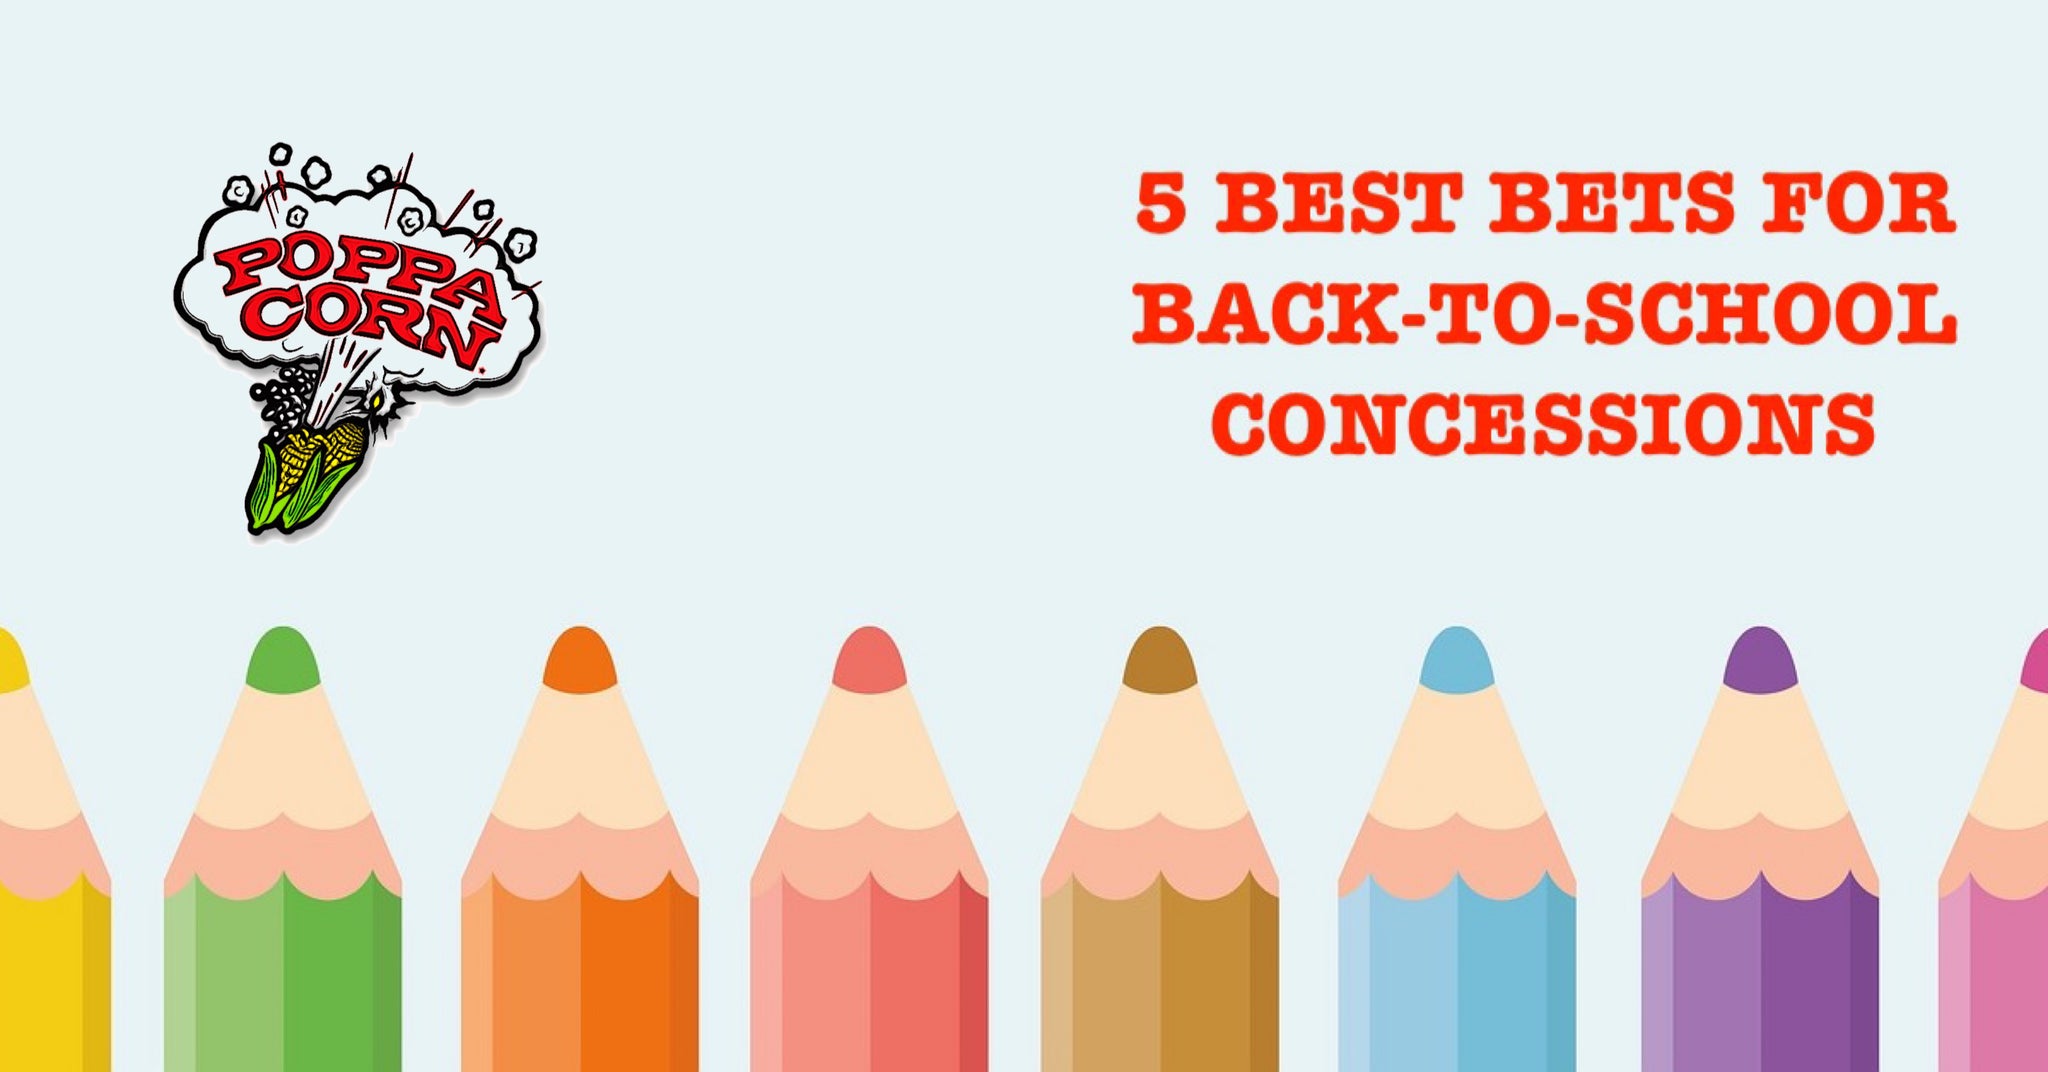 5 Best Bets for Back-to-School Concessions